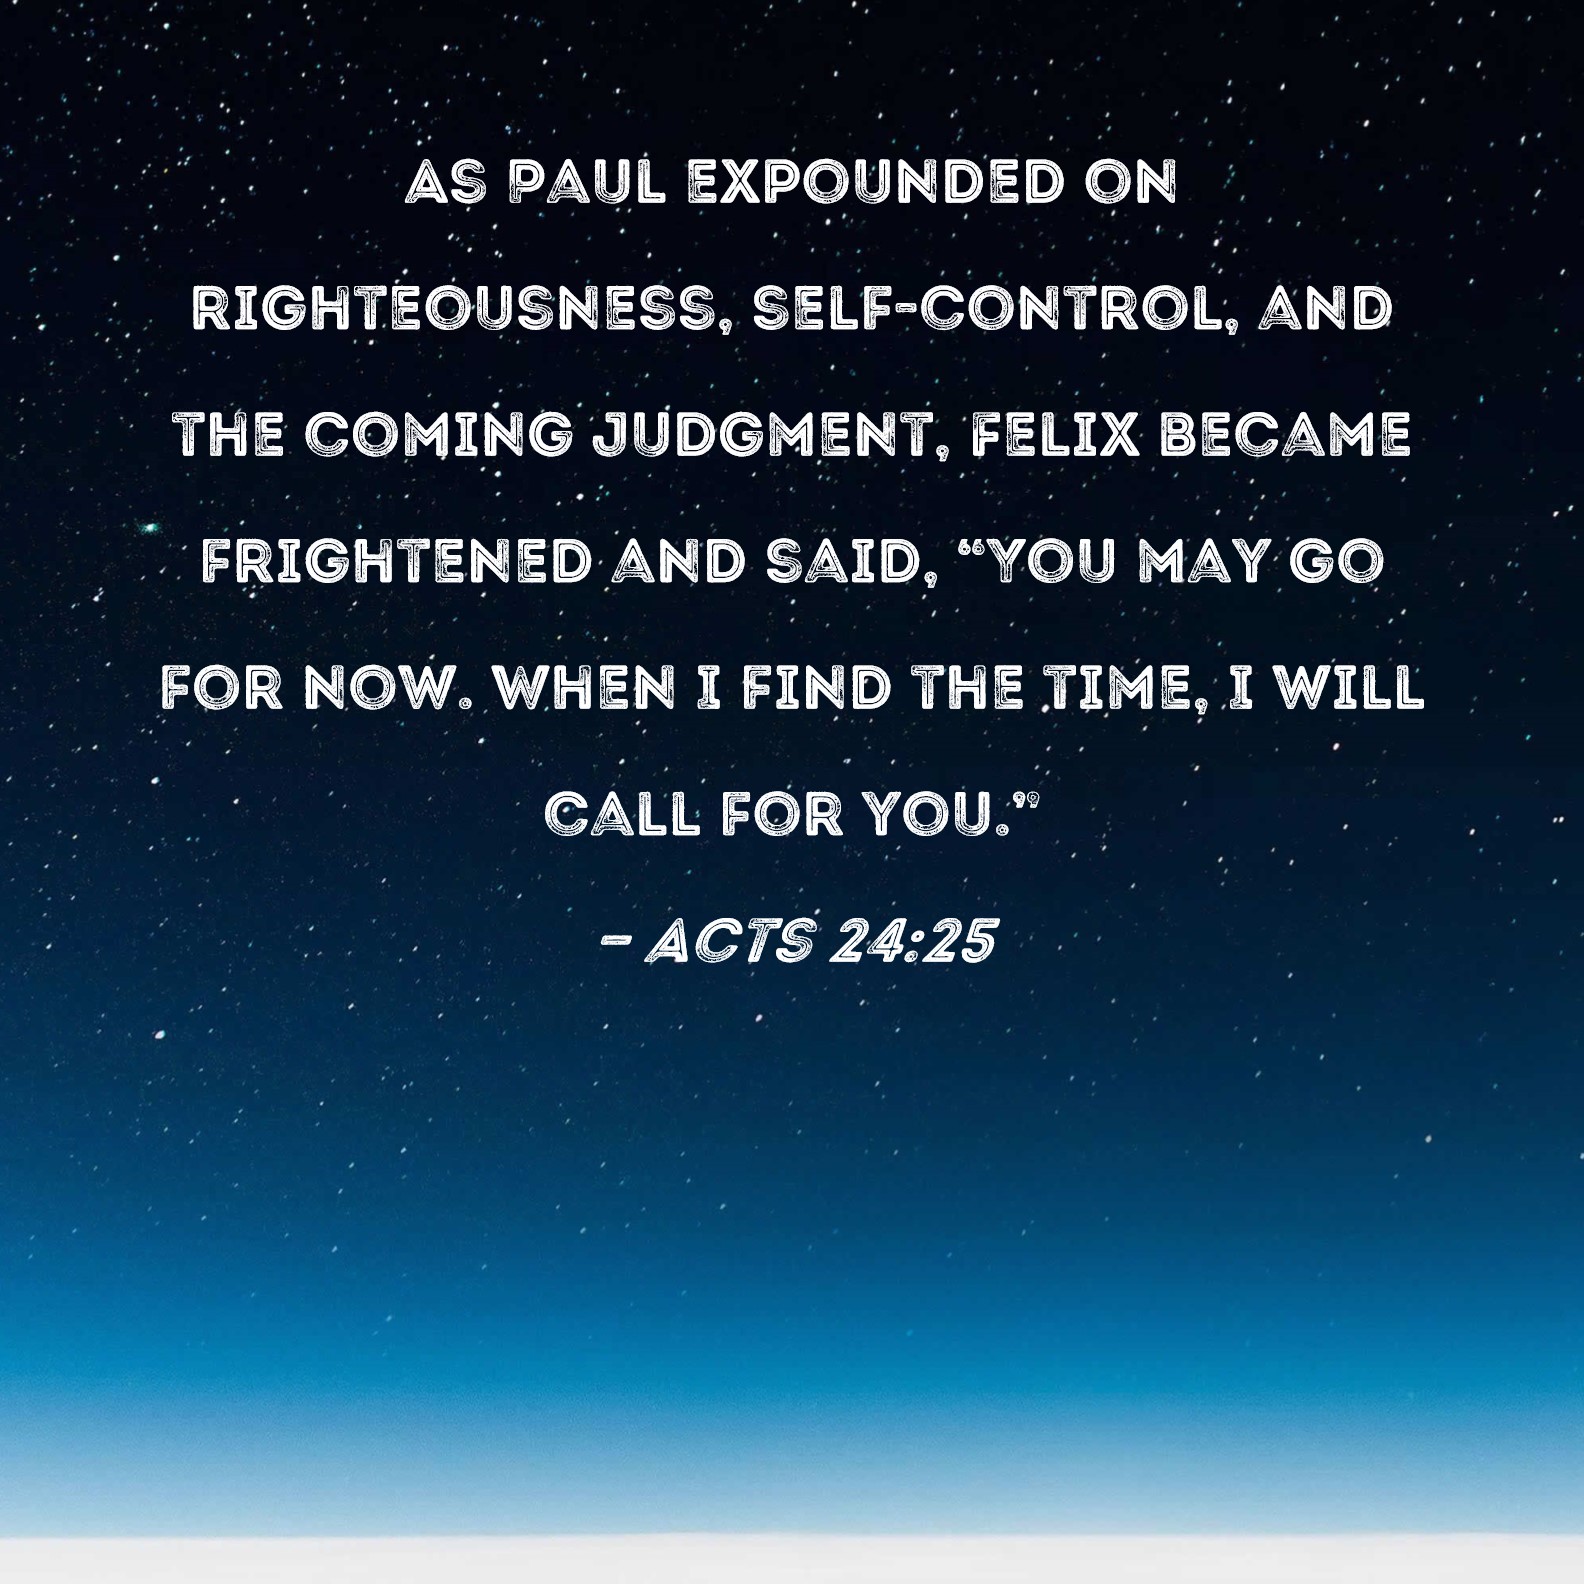 Acts 2425 As Paul expounded on righteousness, selfcontrol, and the